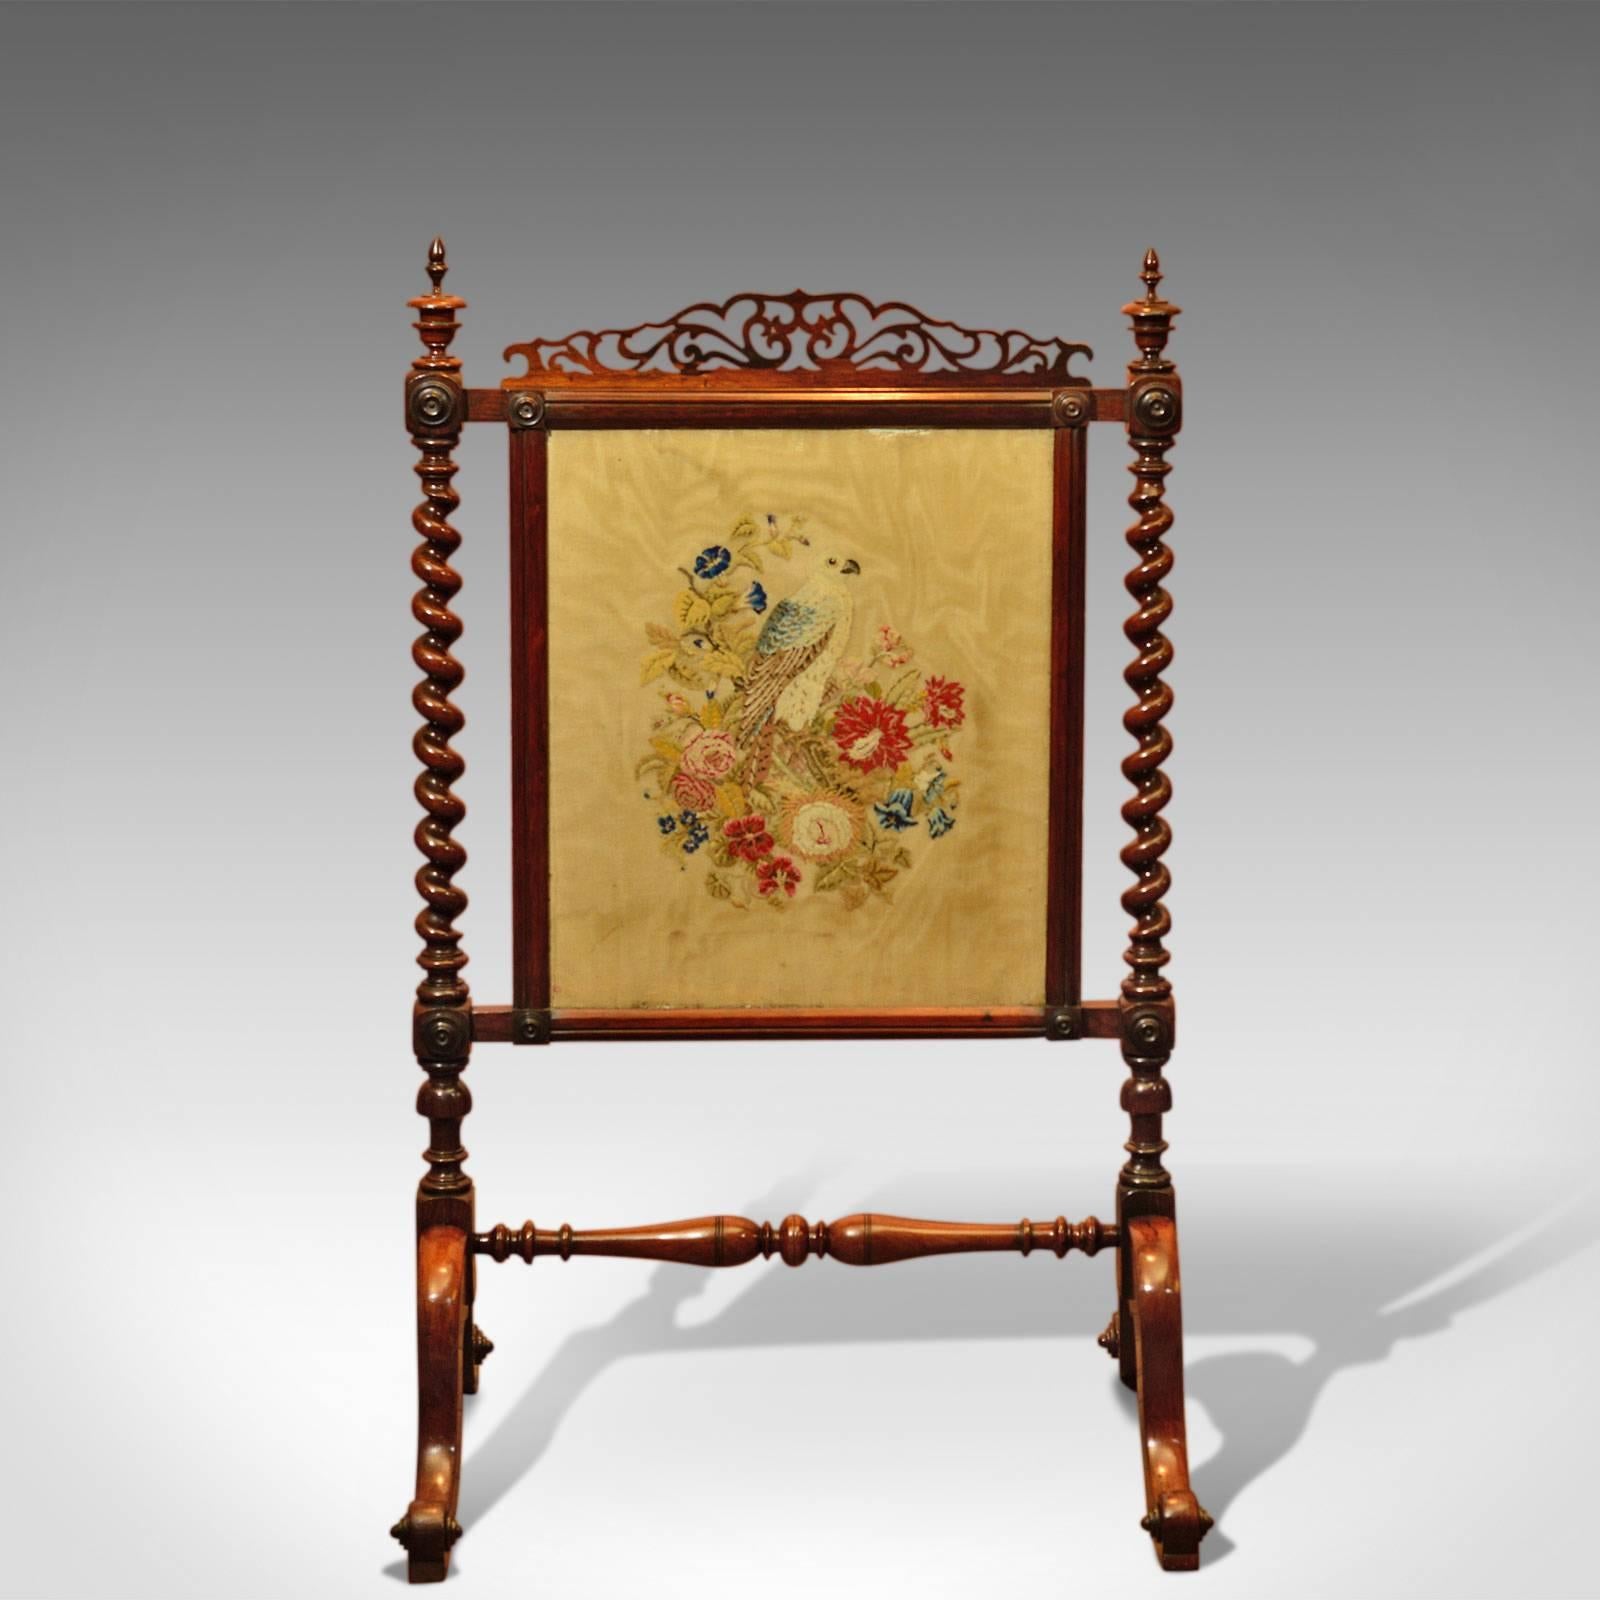 This is an antique, Victorian fire screen dating to circa 1850.

Fine quality and constructed in rosewood with great attention to detail, this screen displays a deep lustrous shine and wonderful antique patina.

Rising on scrolled feet, the